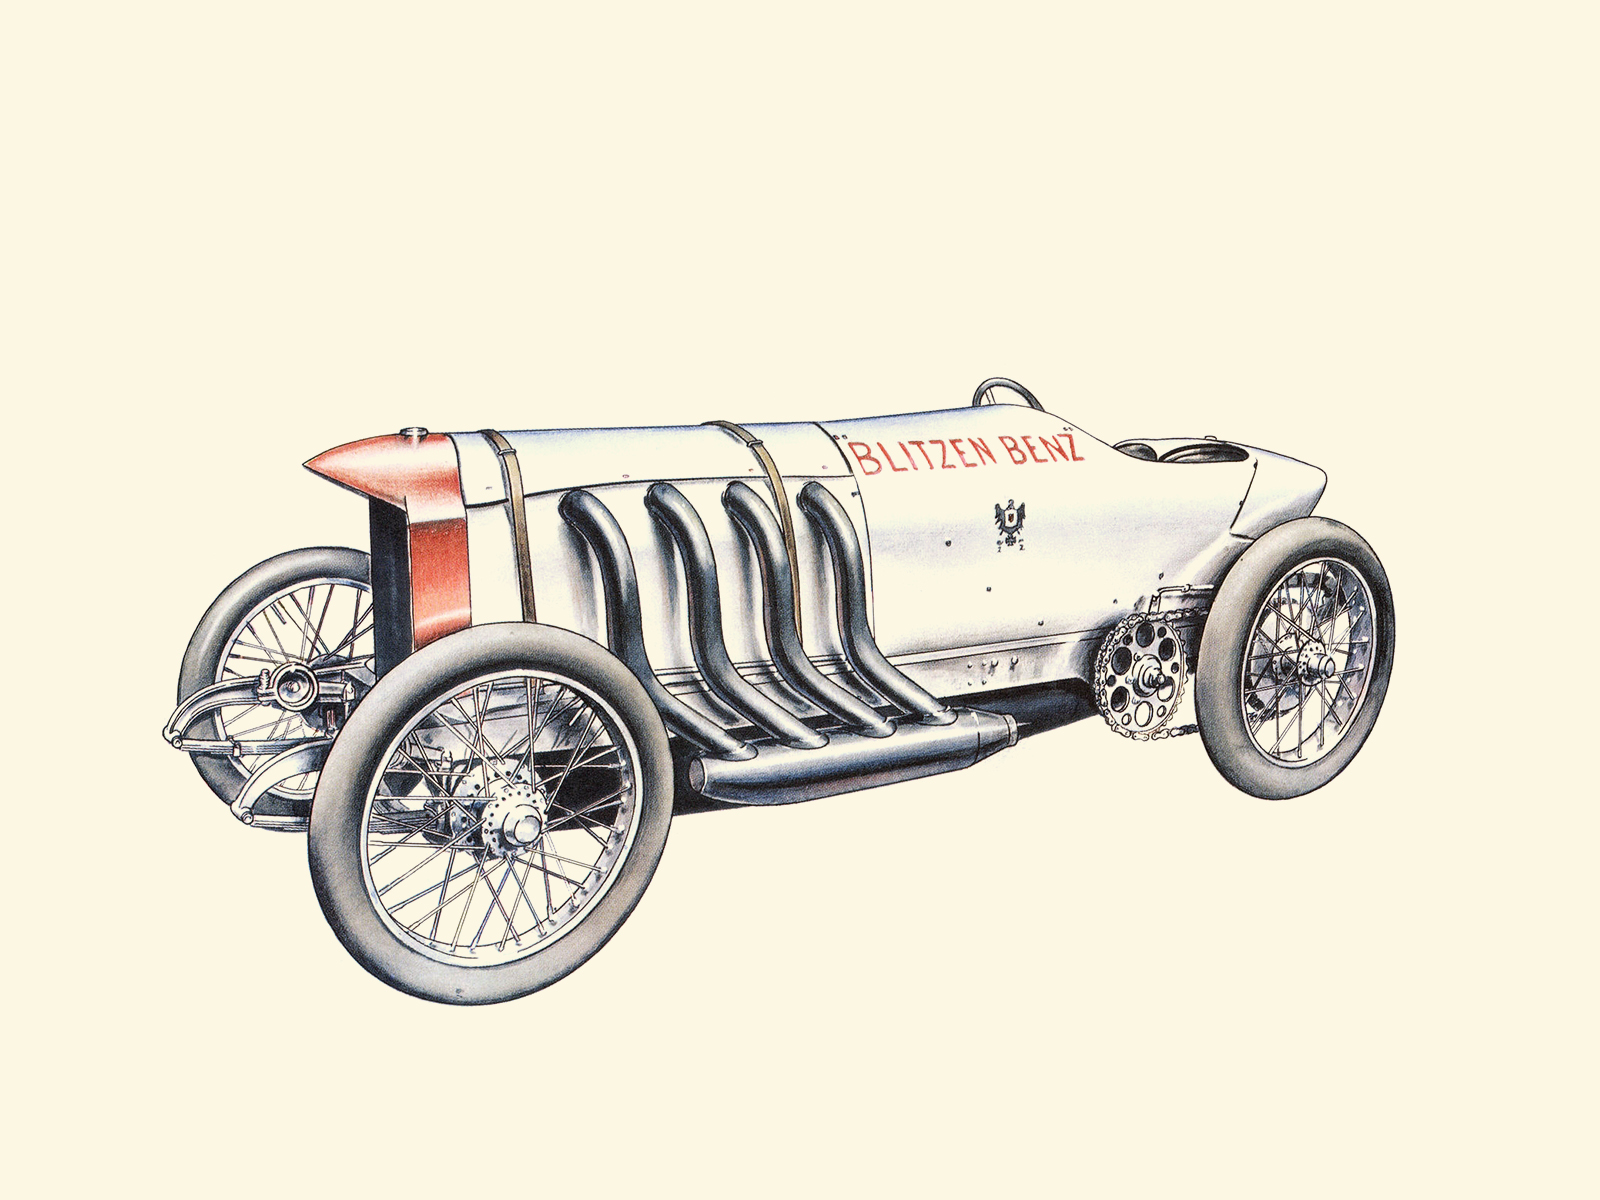 1910 Blitzen Benz (Barney Oldfield 131.72 mph): Illustrated by Piet Olyslager